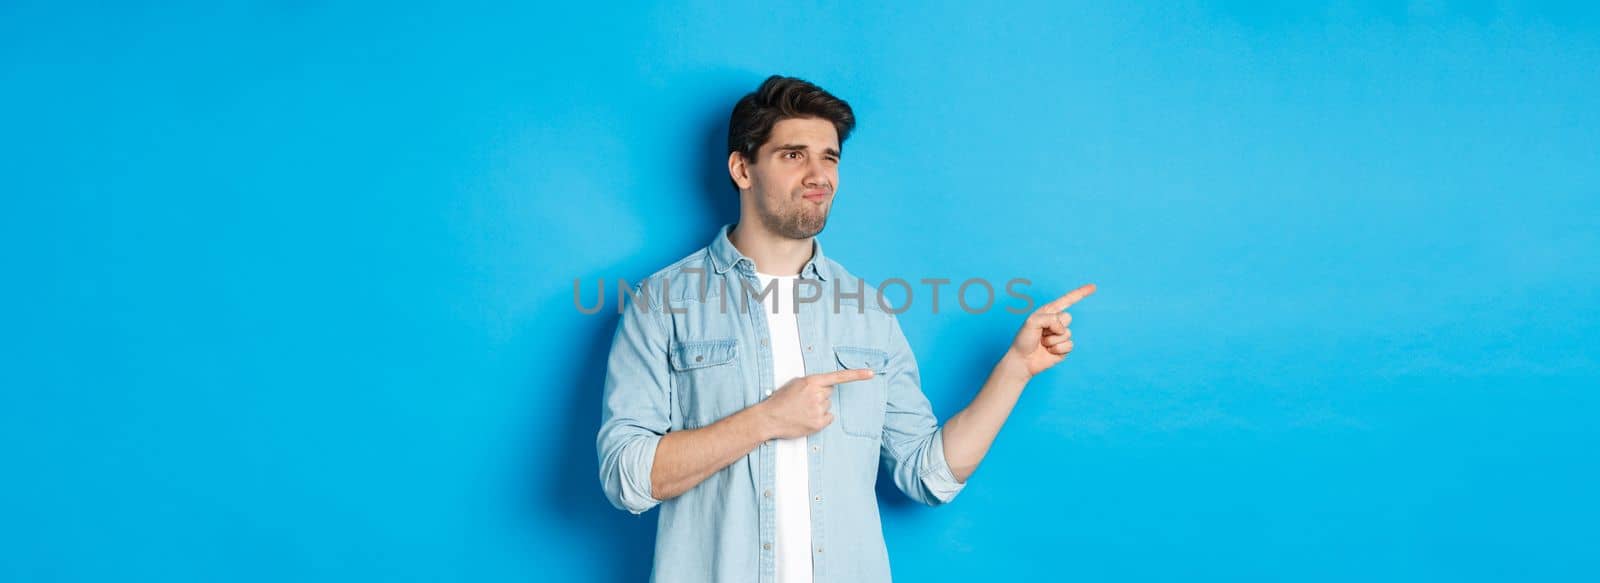 Doubtful adult man pointing fingers left at promotion and looking unsure, grimacing disappointed, standing against blue background.